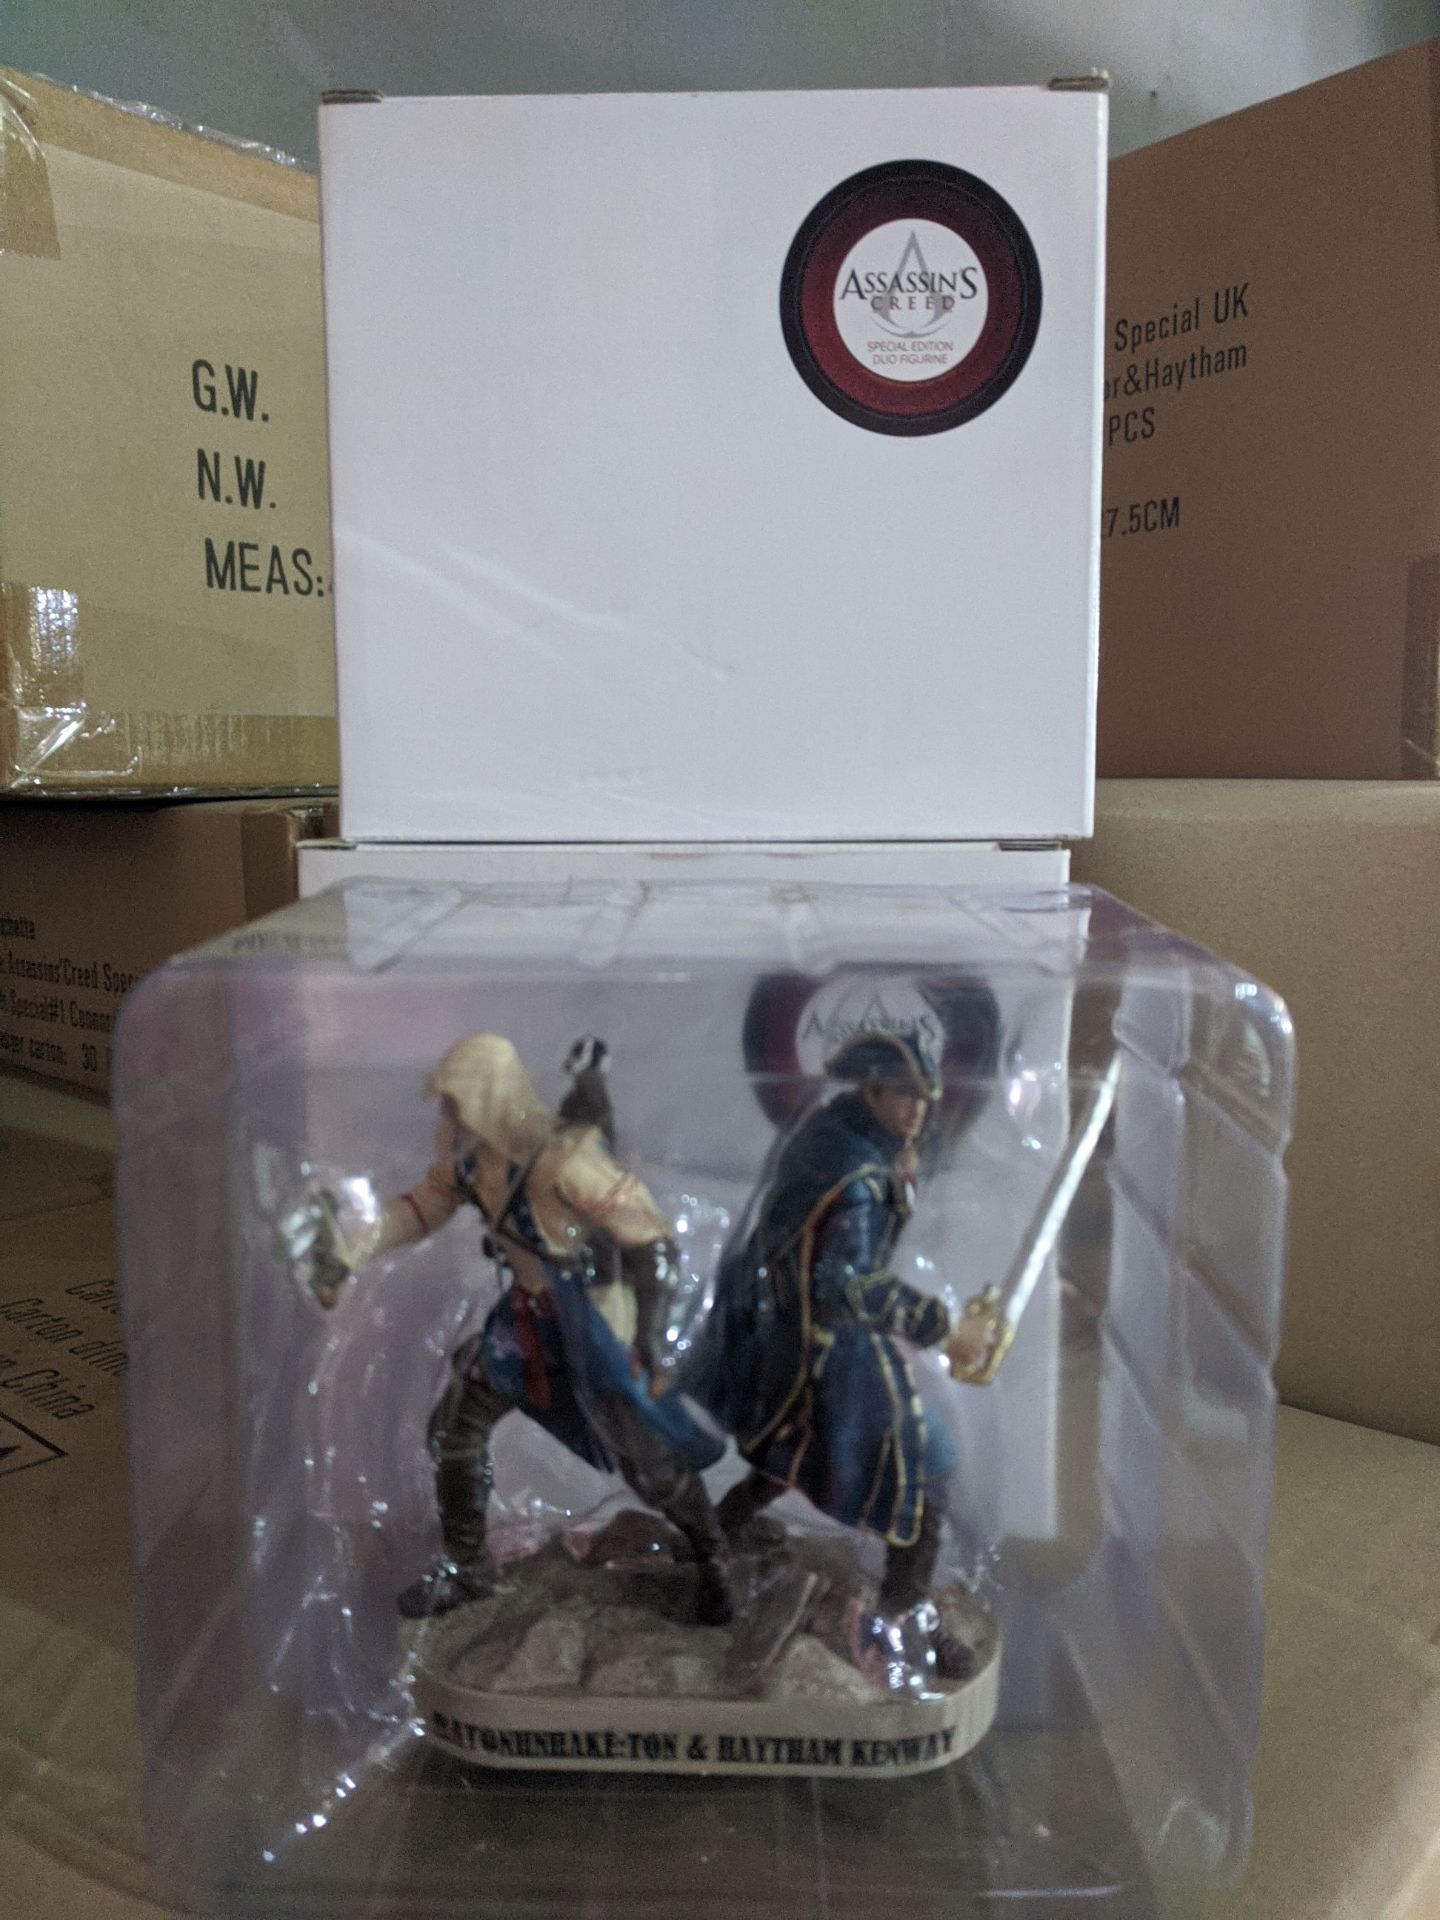 1 PALLET OF 500 NEW AND BOXED ASSASSINS CREED TWIN SET FIGURINES, COLLECTORS ITEM *PLUS VAT*